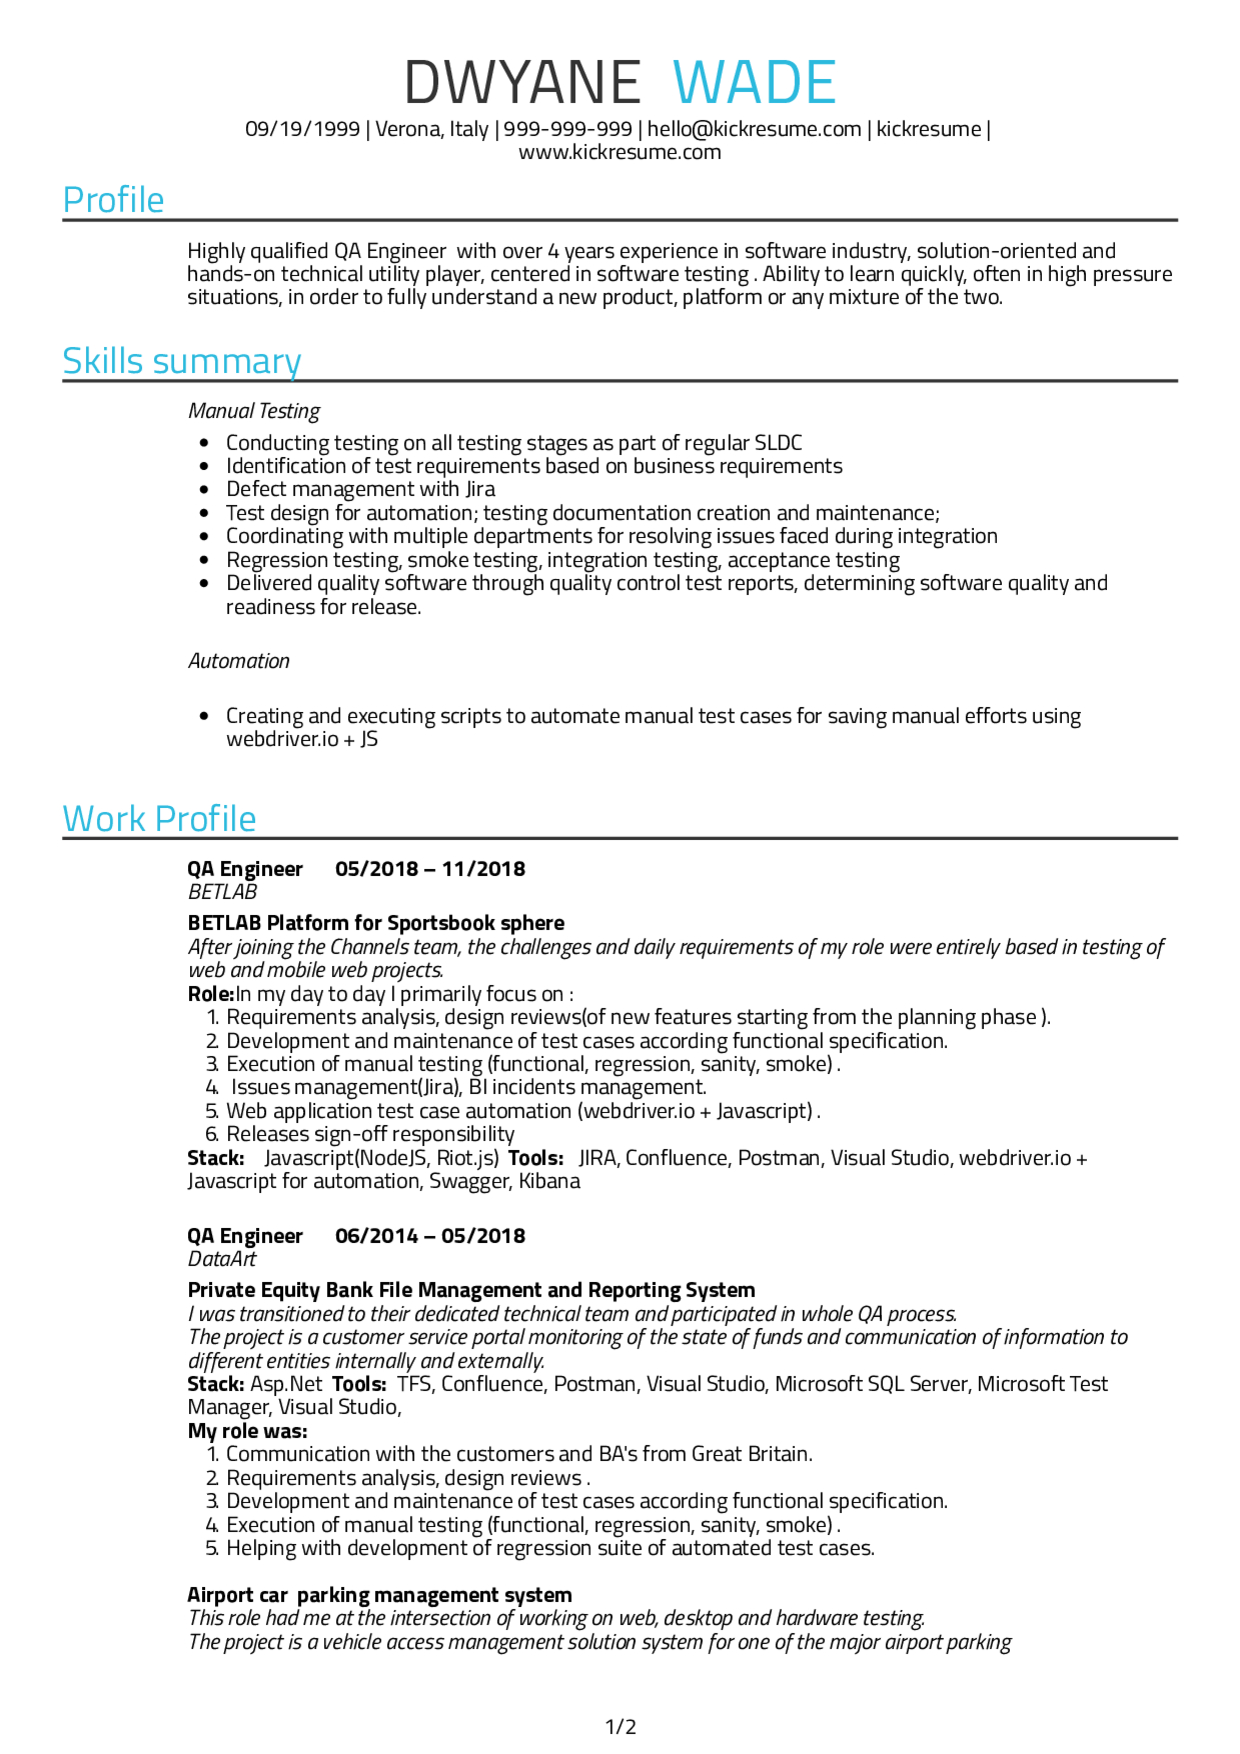 Resume Examplesreal People: Quality Assurance Engineer In Software Quality Assurance Report Template